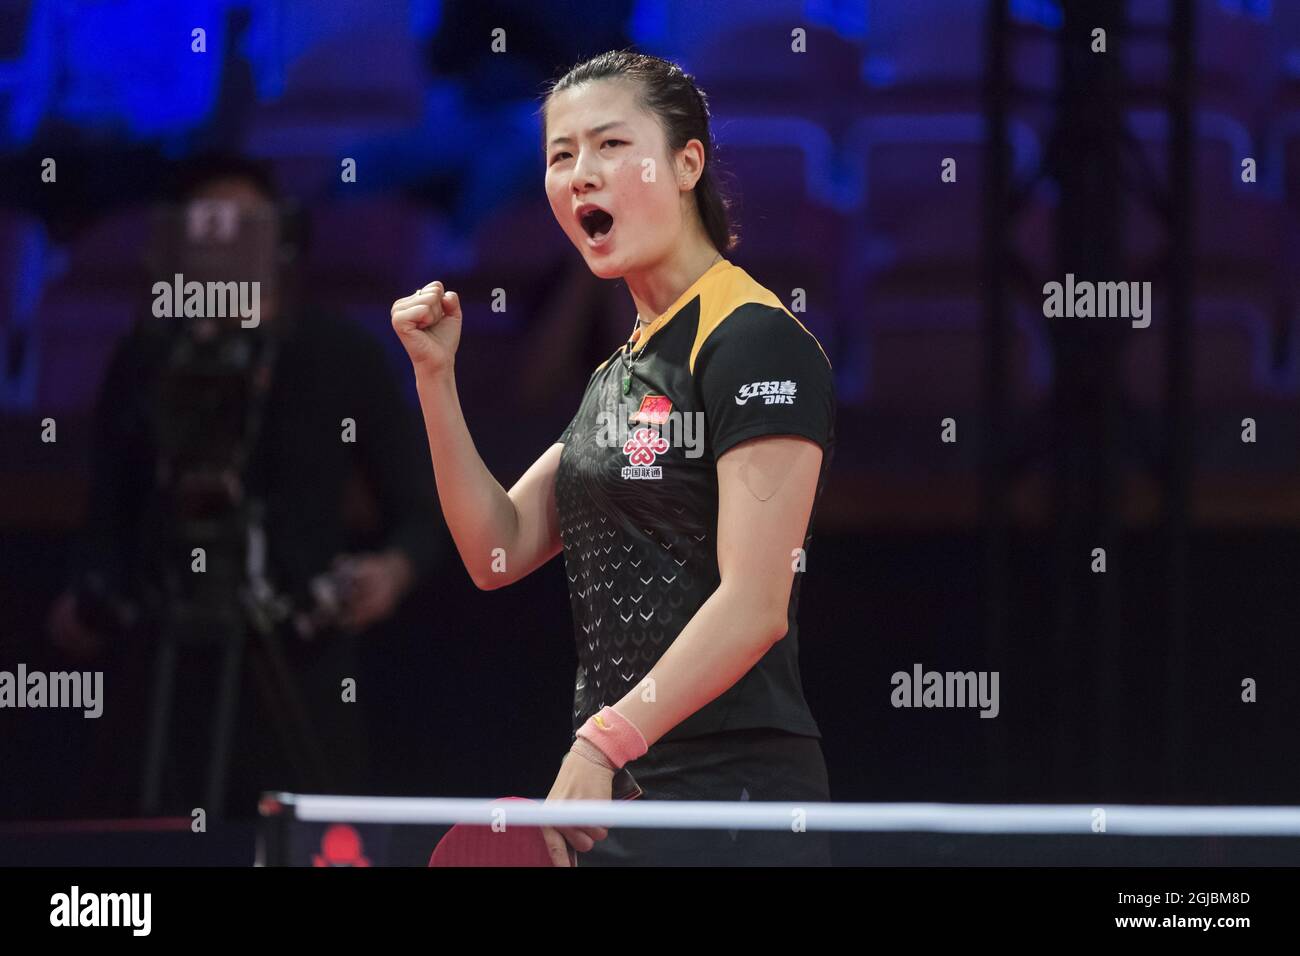 Ding Ning of China in action against Ishikawa Kasumi of Japan during the women's quarterfinal table tennis match at the Swedish Open Championships in Eriksdalshallen in Stockholm, Sweden, on Nov. 03, 2018. Photo: Stina Stjernkvist / TT / code 11610  Stock Photo